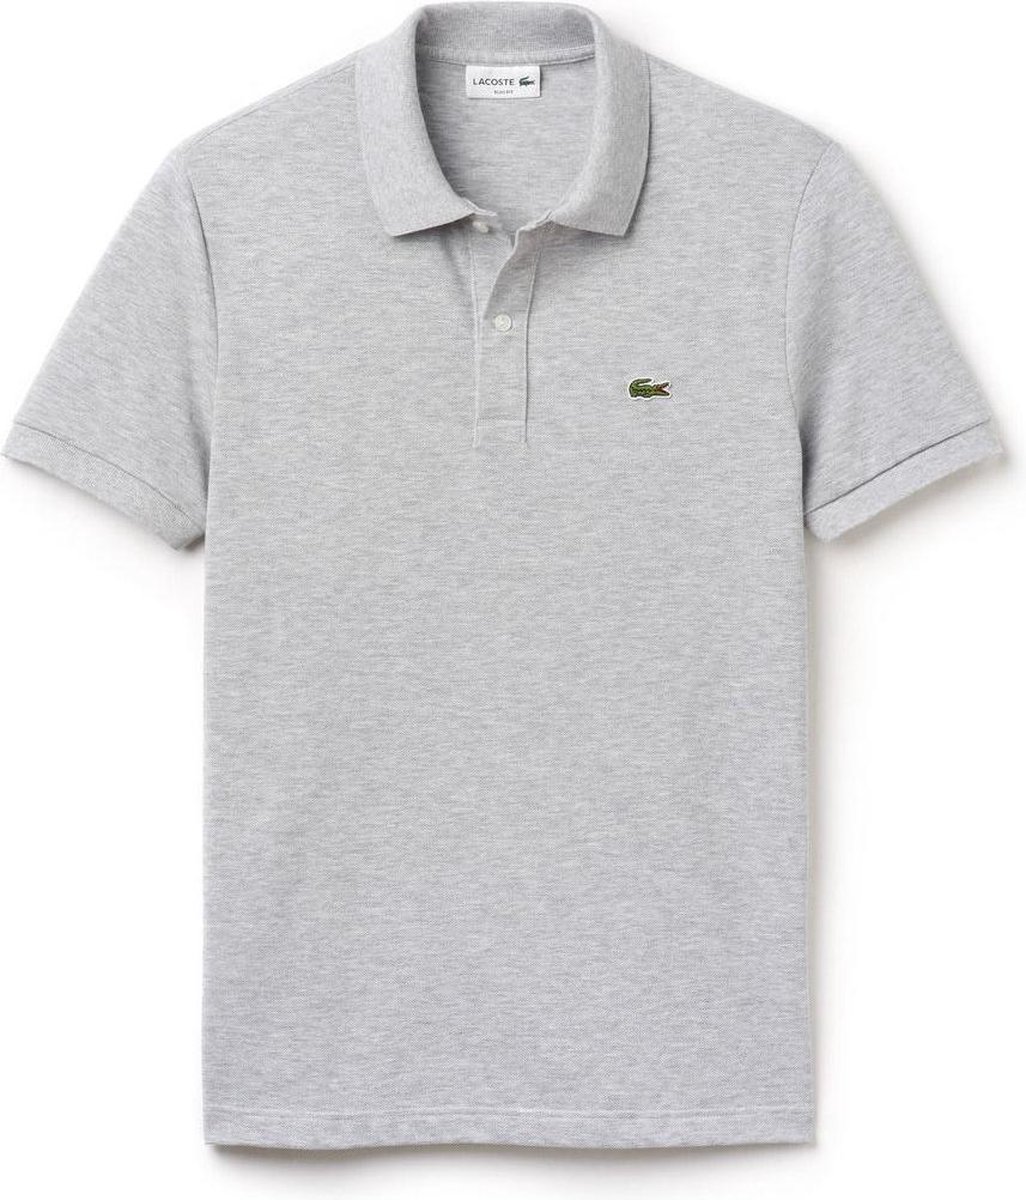 Automatisch premie prins Lacoste - Maat S - Heren Poloshirt - Silver Chine | DGM Outlet